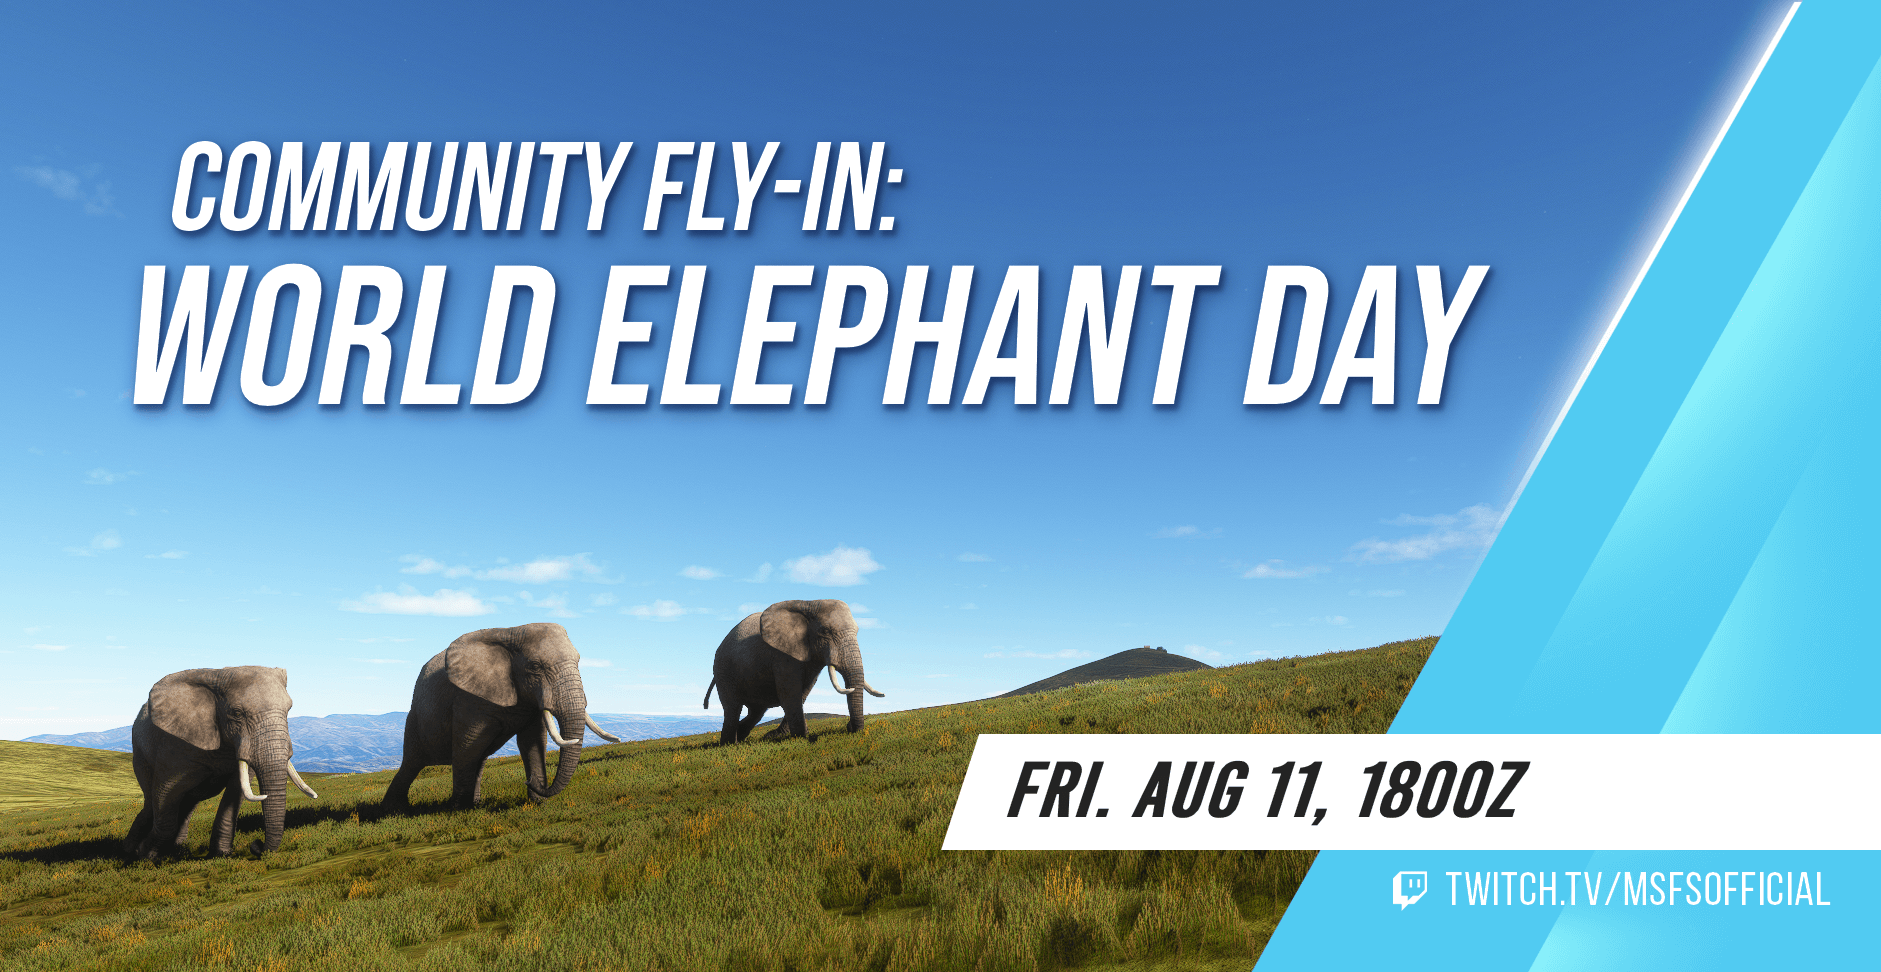 Three elephants walk up a hill. Community Fly-In: World Elephant Day. Join us on Friday August 11th at 1800Z. Watch at twitch.tv/msfsofficial!